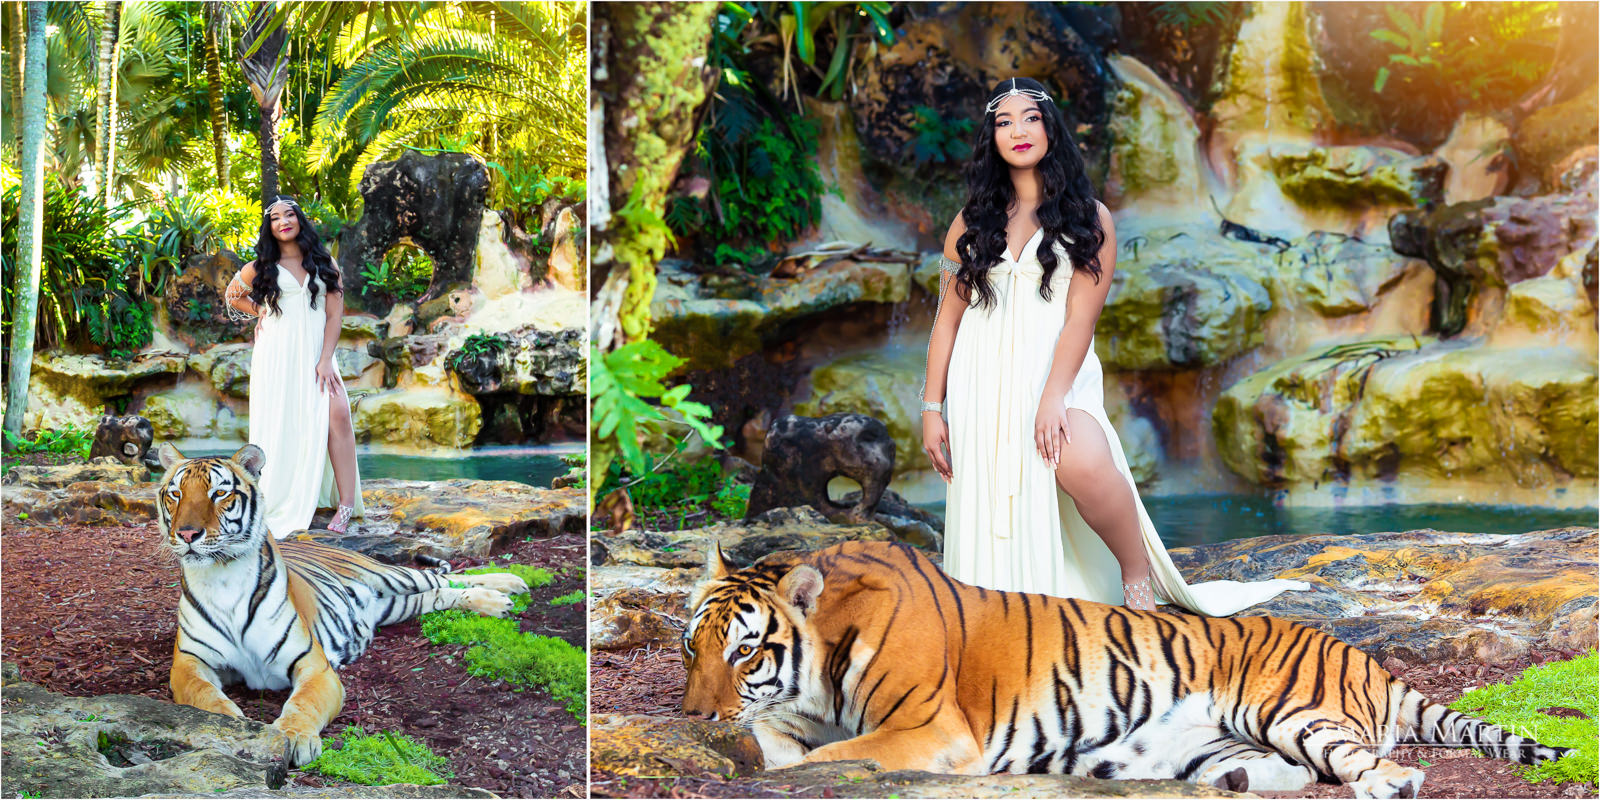 Quinceanera photoshoot with animals, quinceanera with tiger, quince dress boutique, Samaria Martin photographer, gown rental